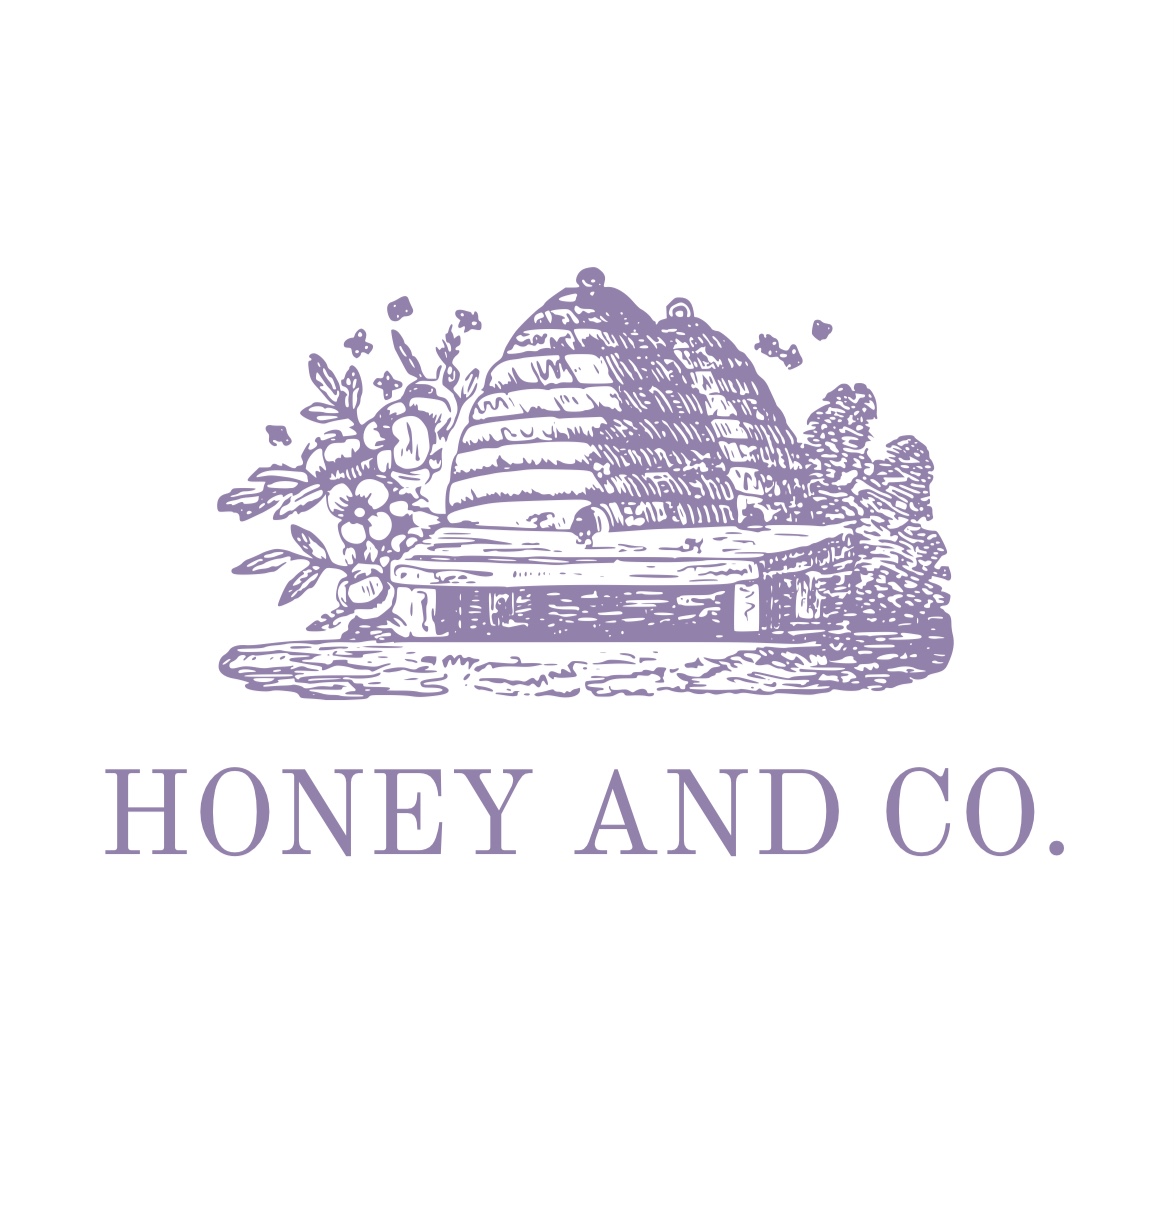 Honey and Co.